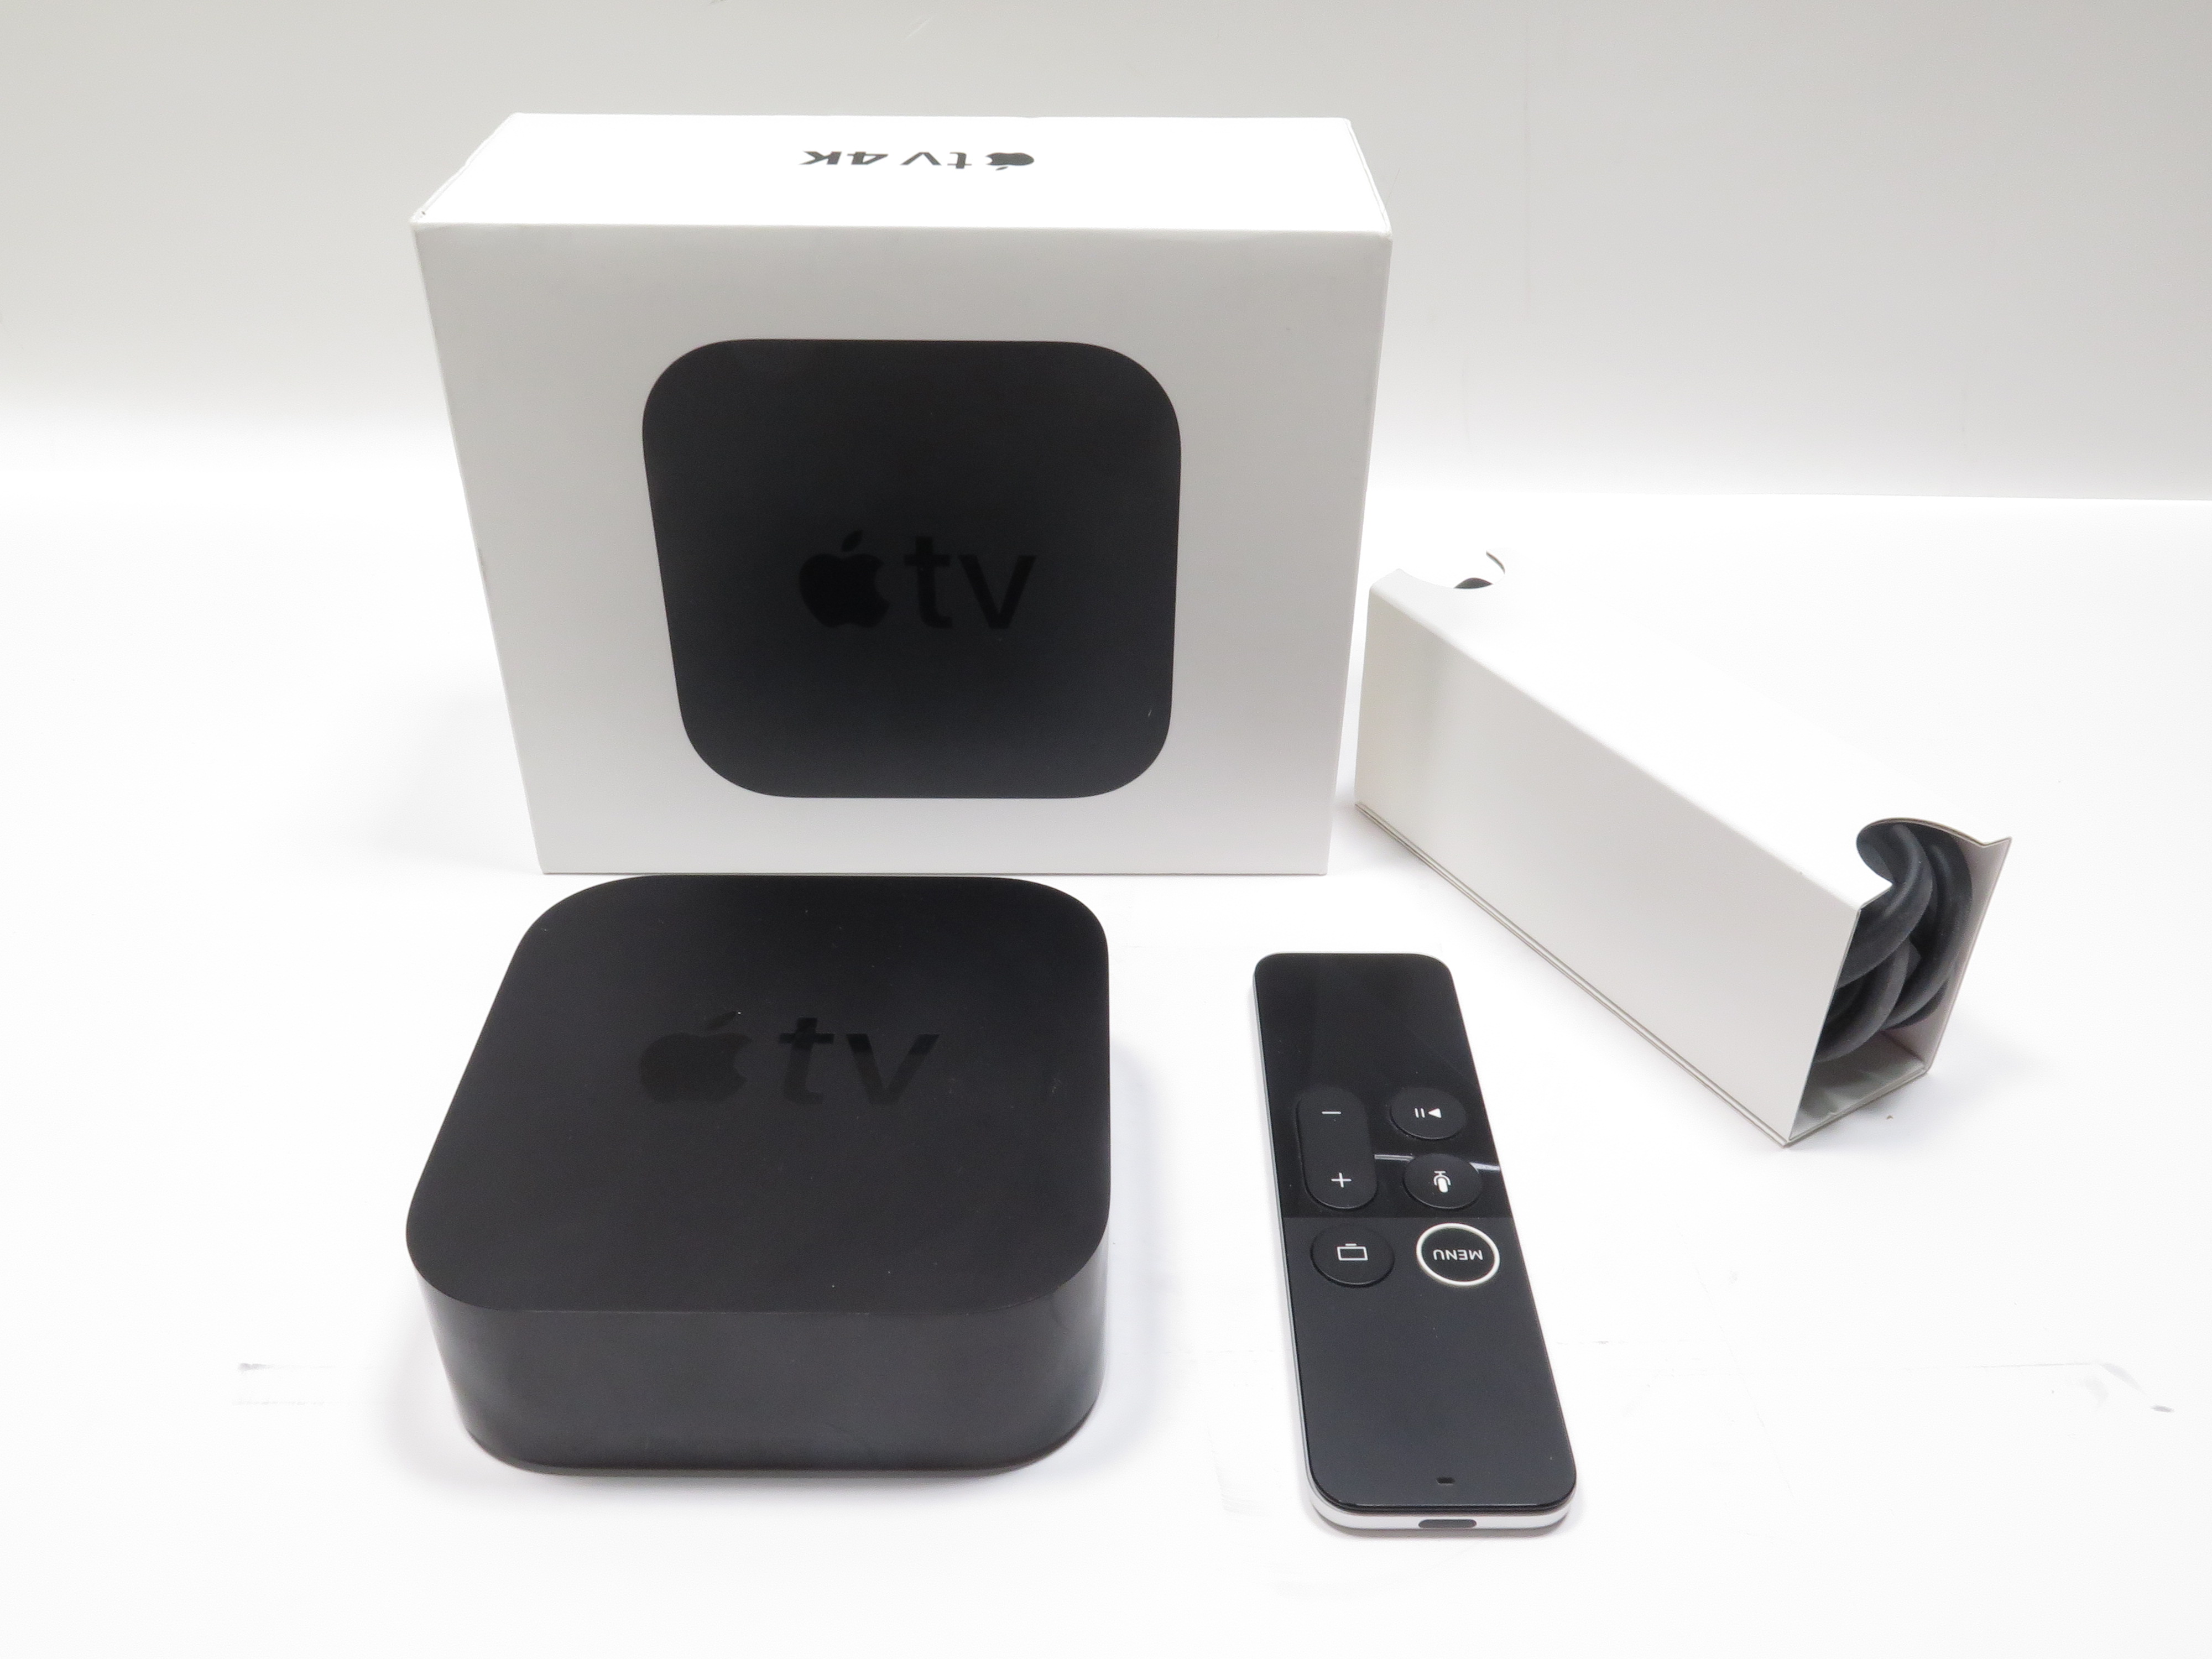 Used Like New Apple TV 64GB 4K HDR A1842 MP7P2LL/A Black with remote - Black